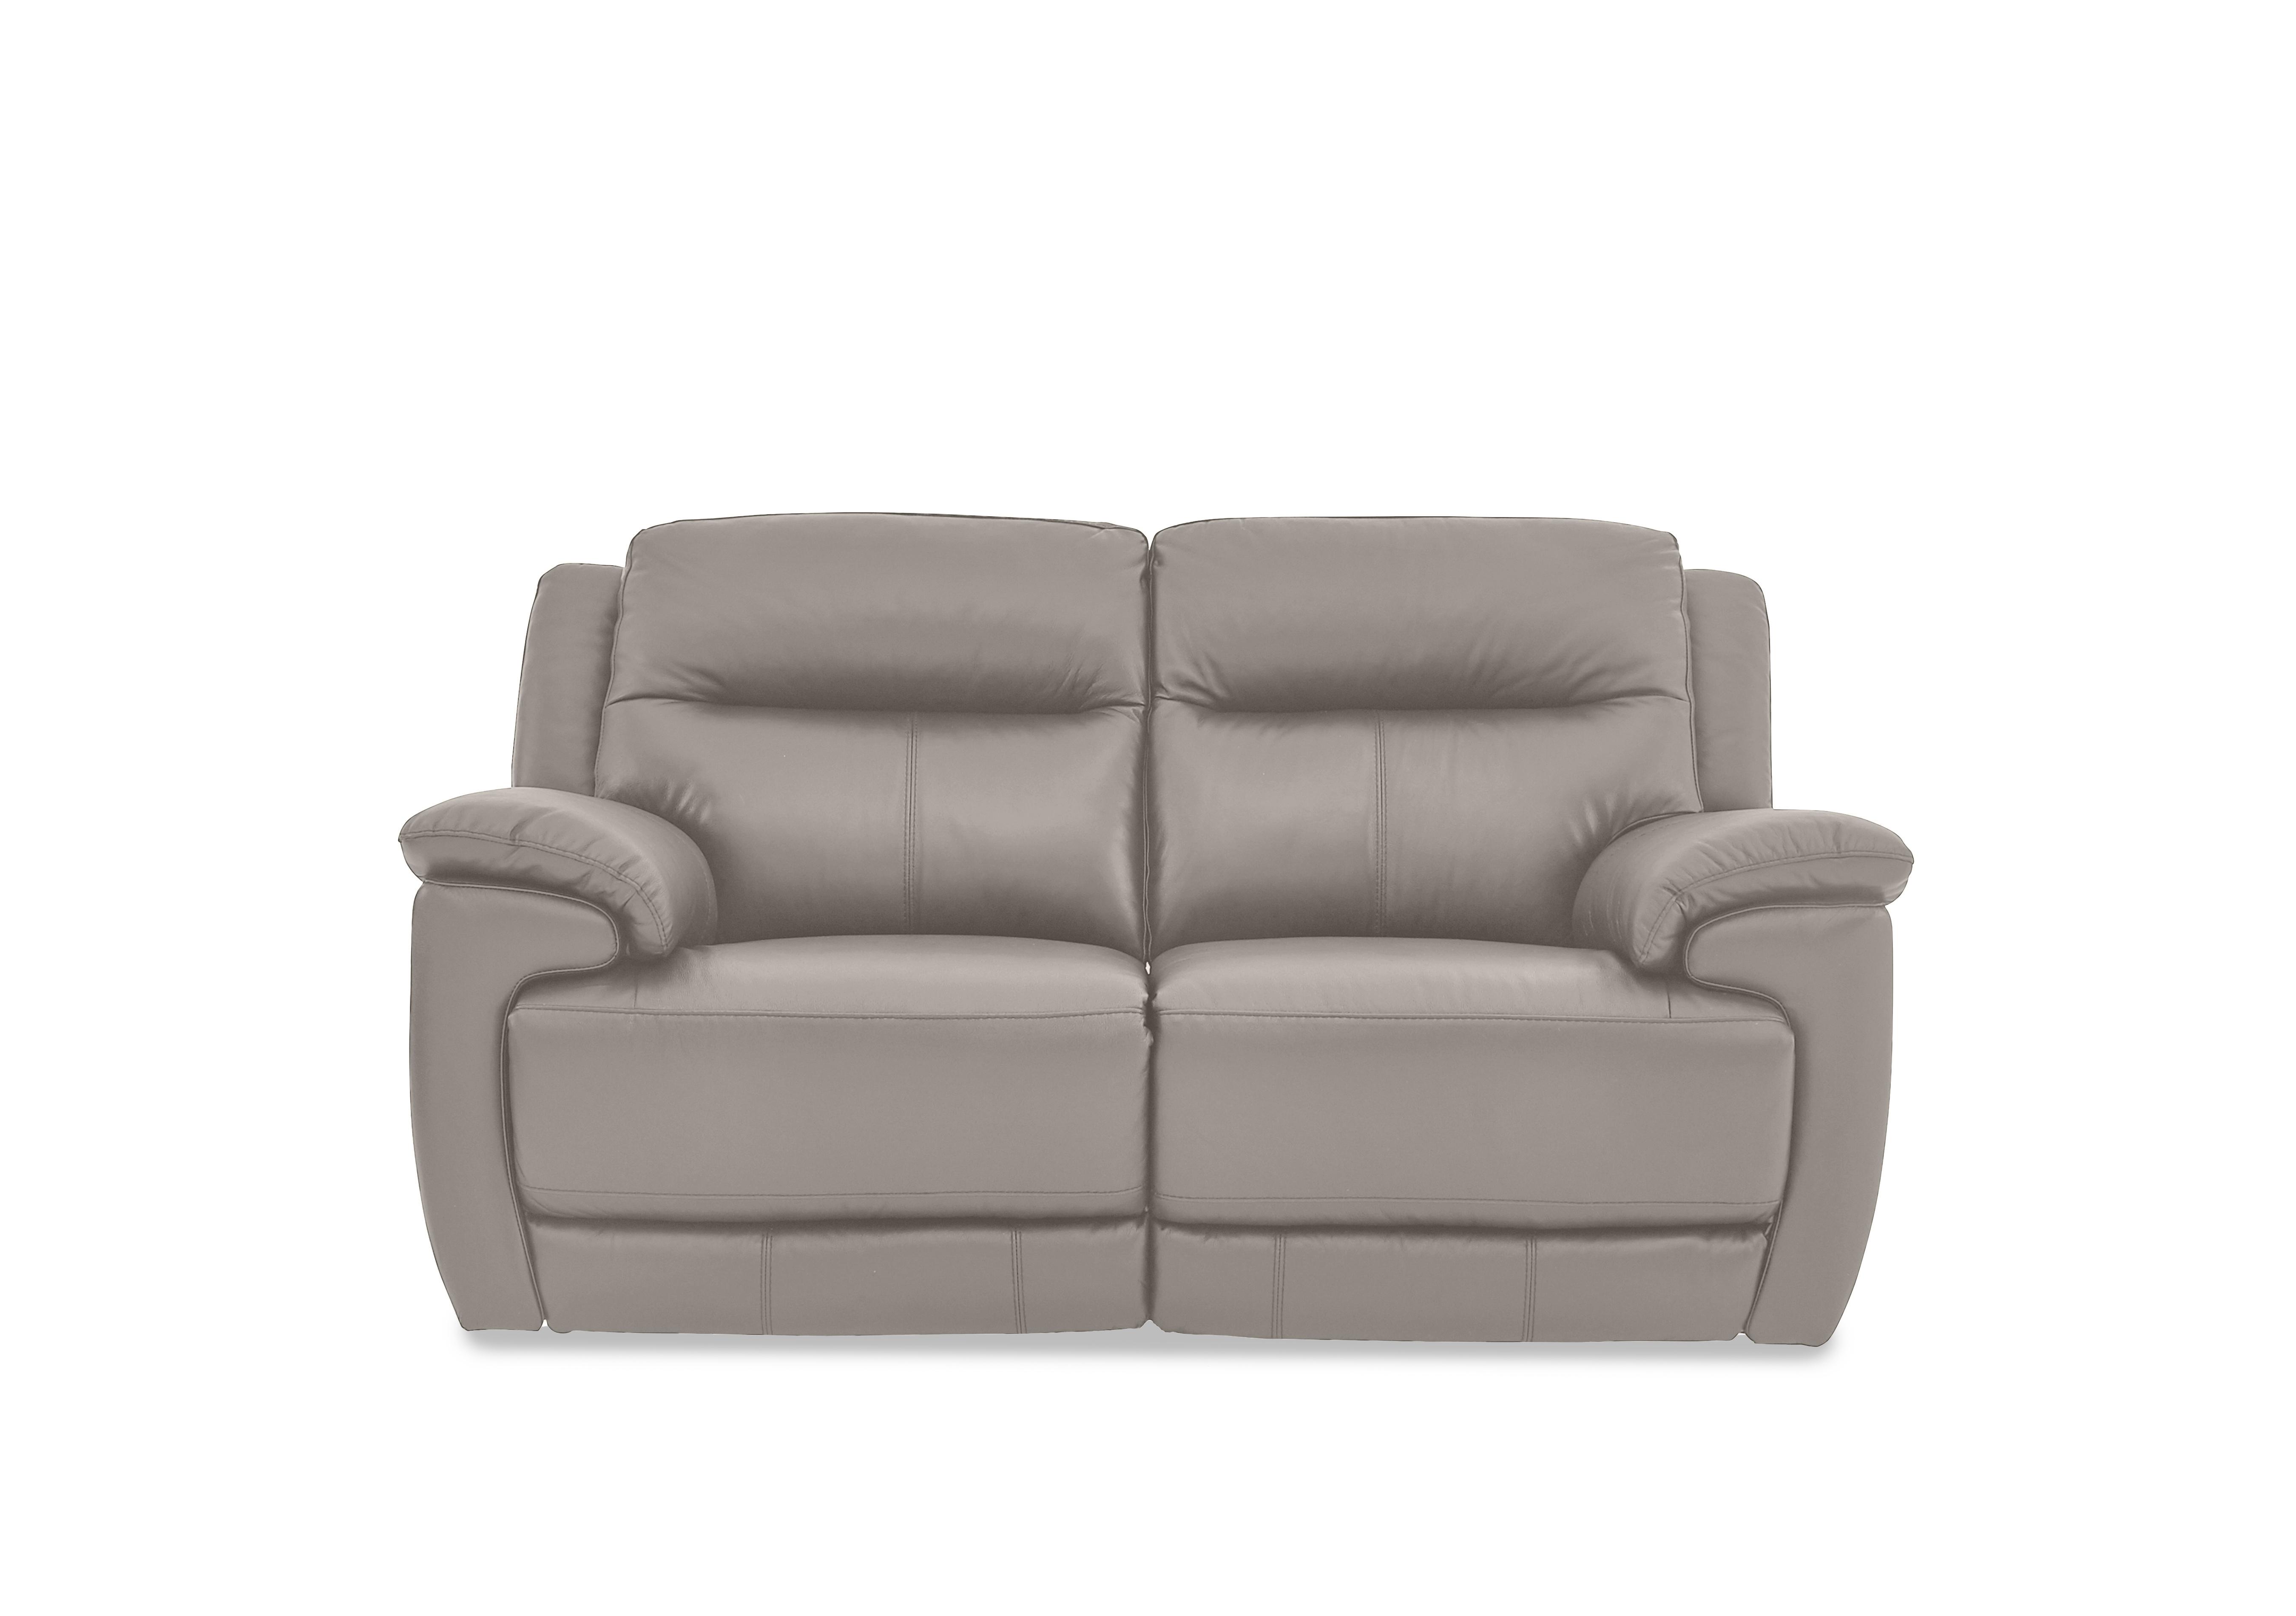 Touch 2 Seater Leather Sofa in Bv-946b Silver Grey on Furniture Village